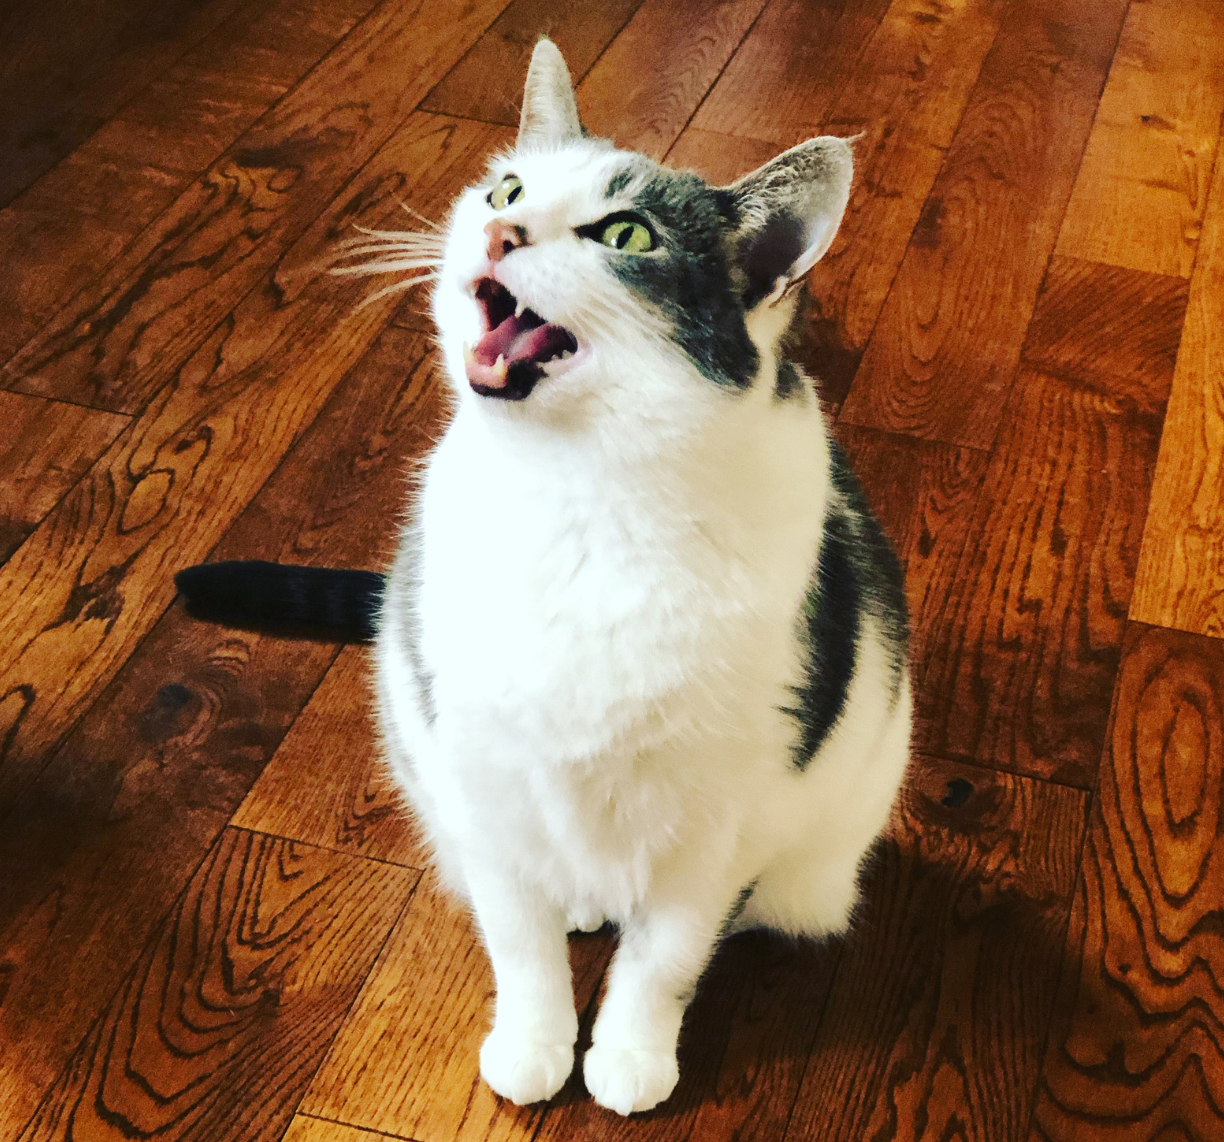 cat meowing side